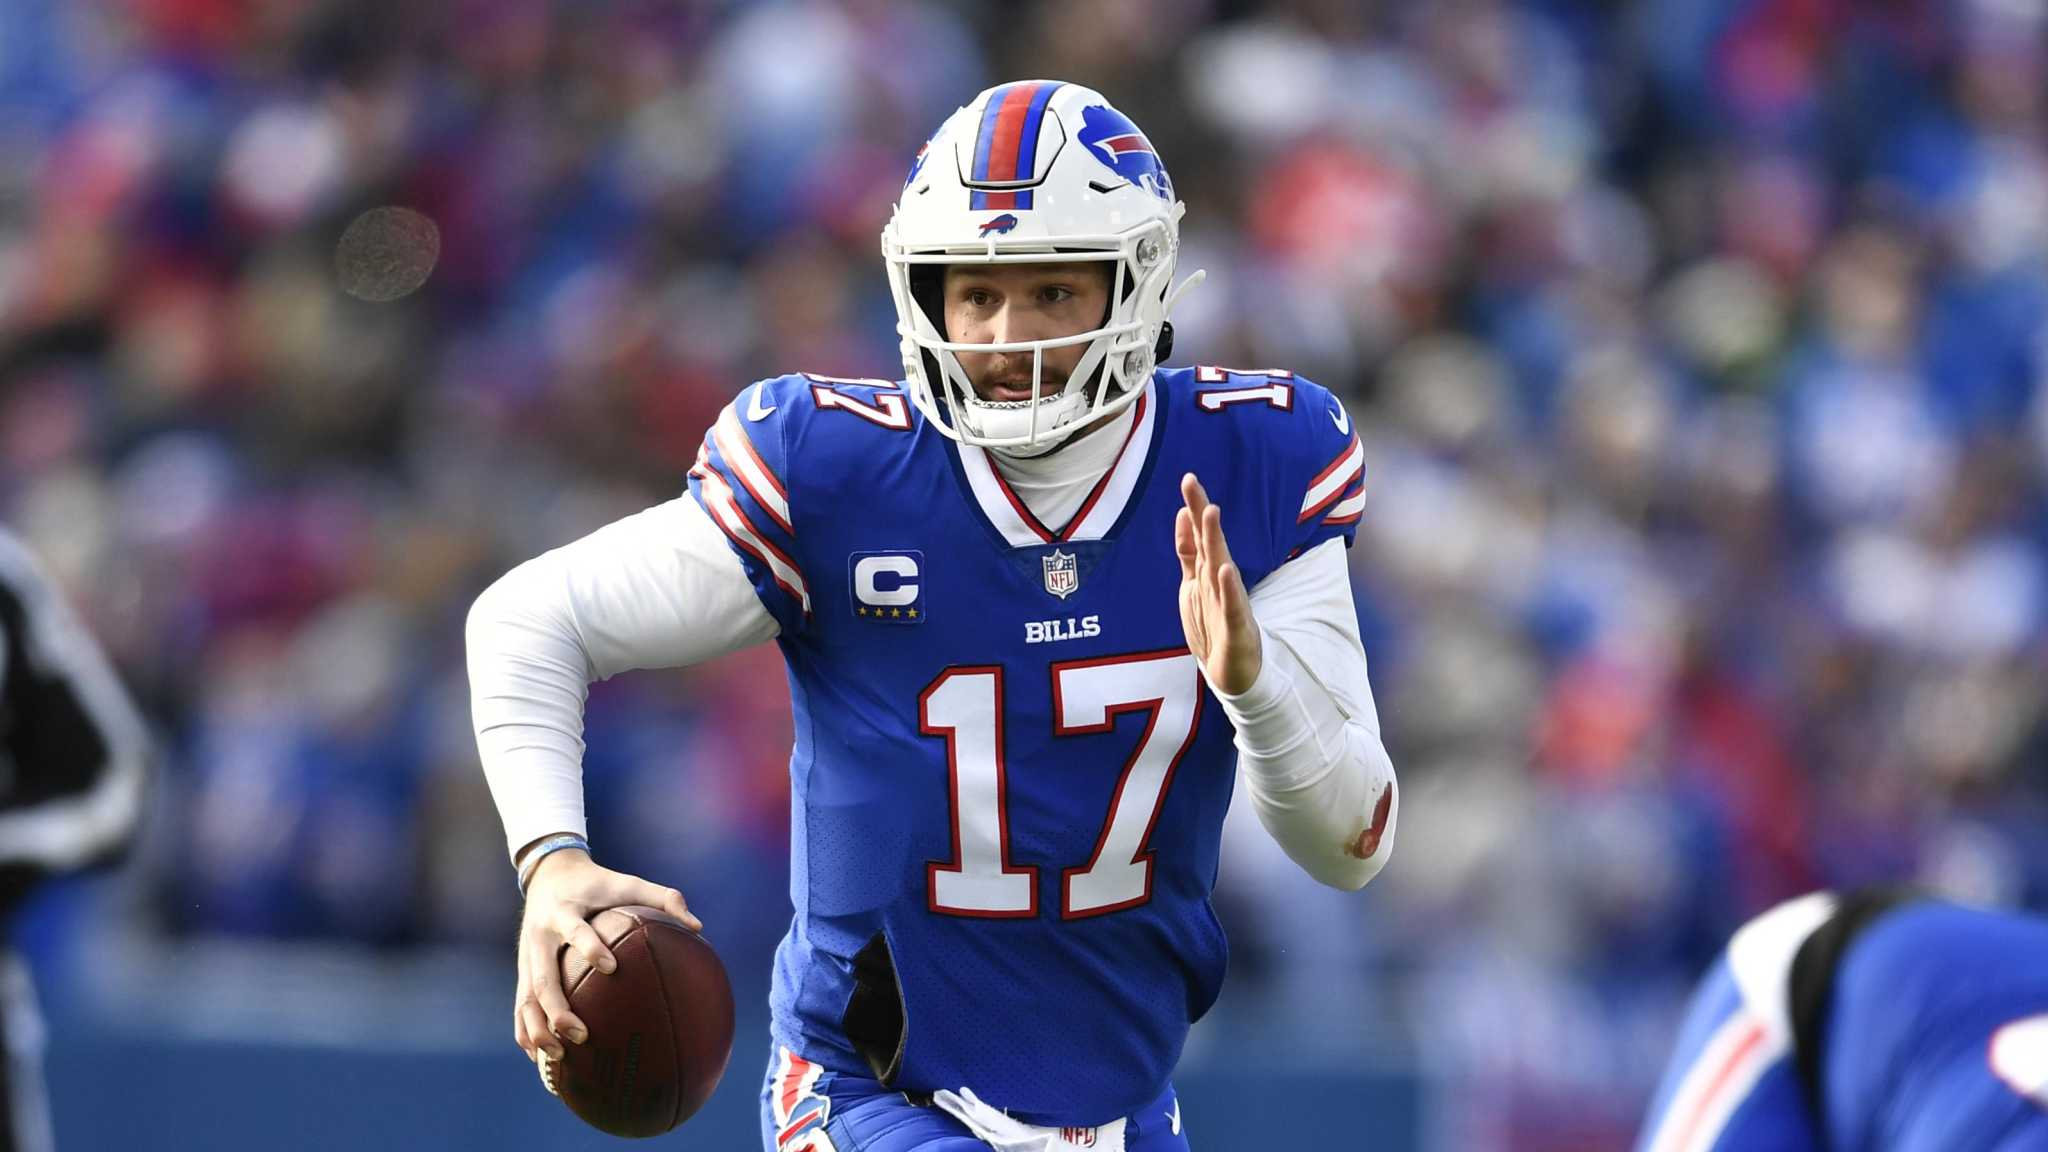 Bills hang on for 34-31 wild-card win over Dolphins